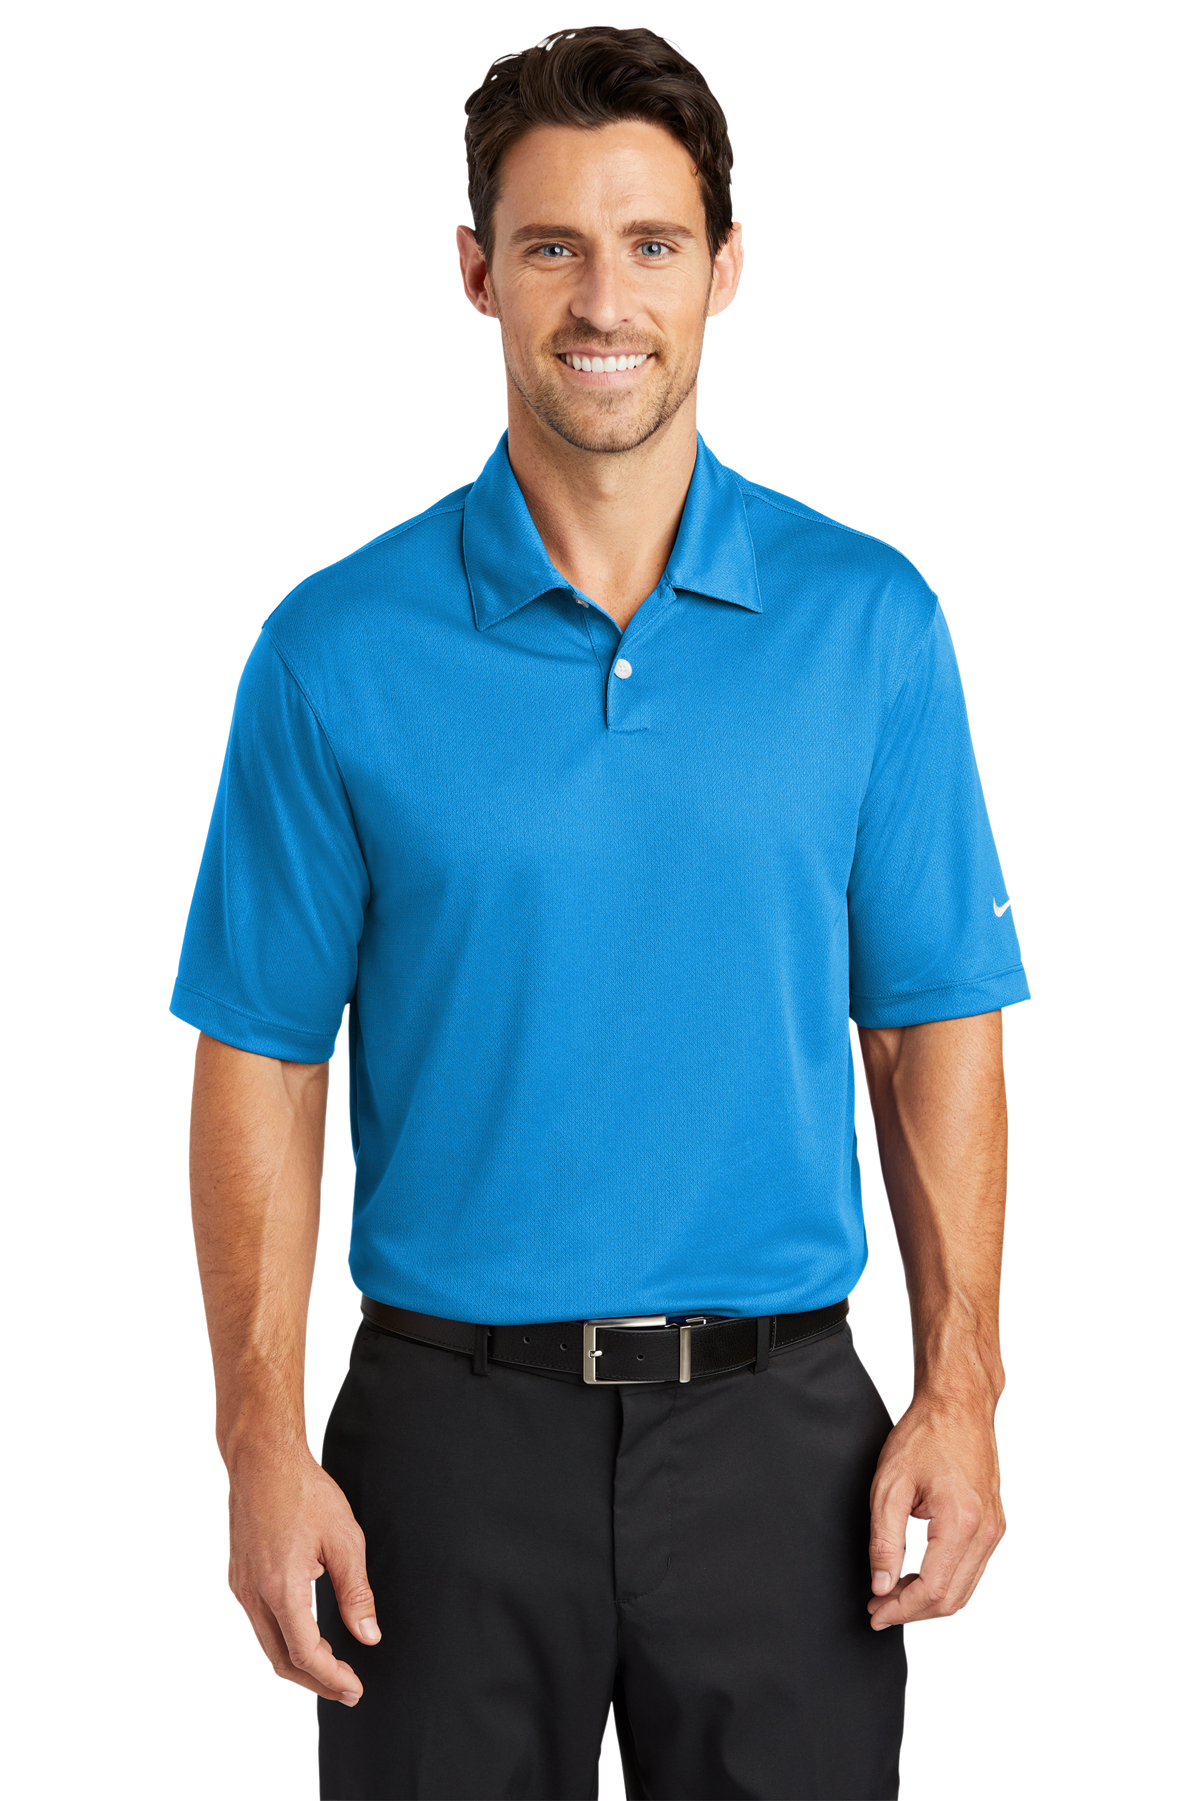 Nike Golf Embroidered Men's Dri-FIT Pebble Texture Polo